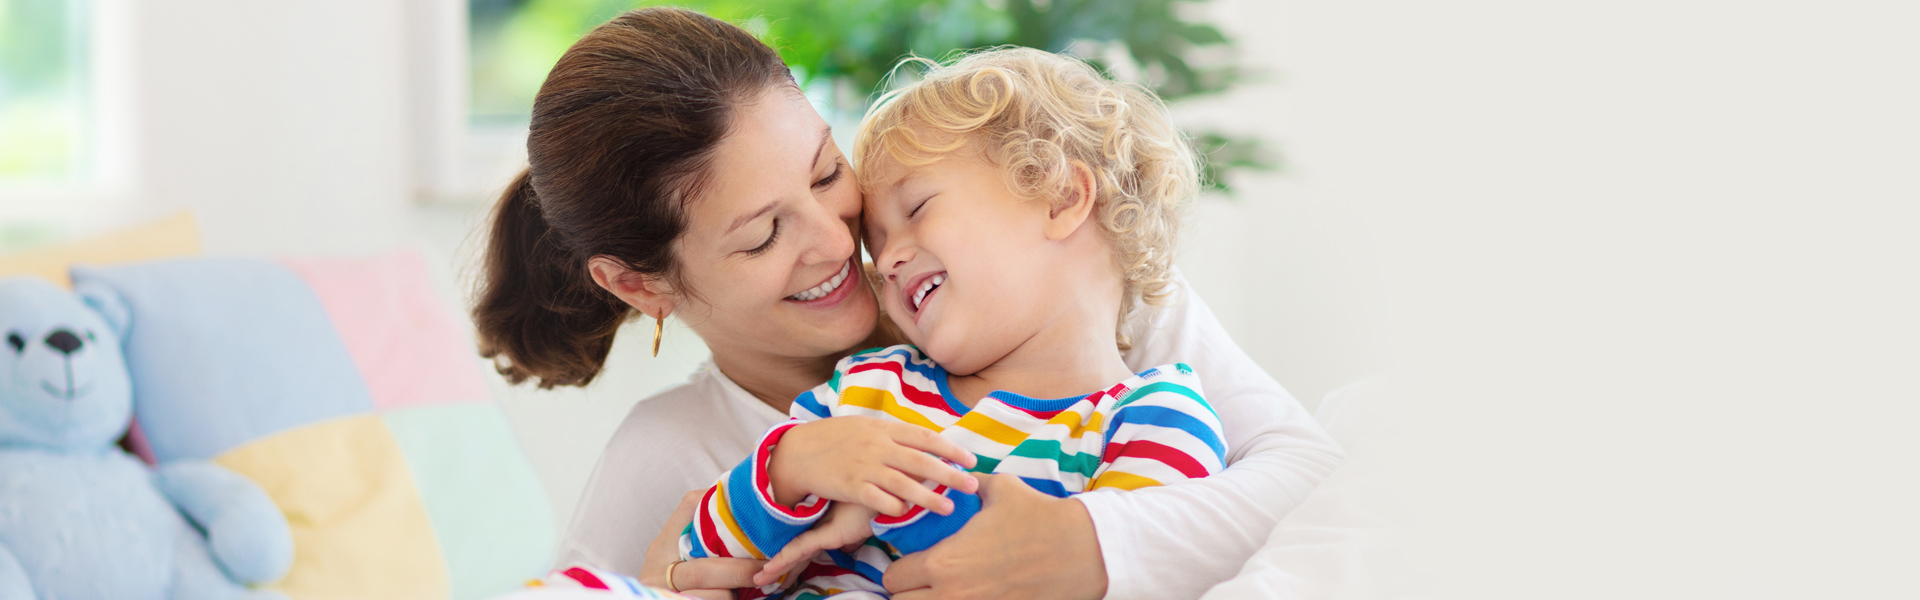 When Should a Child's First Dental Appointment Be Scheduled?